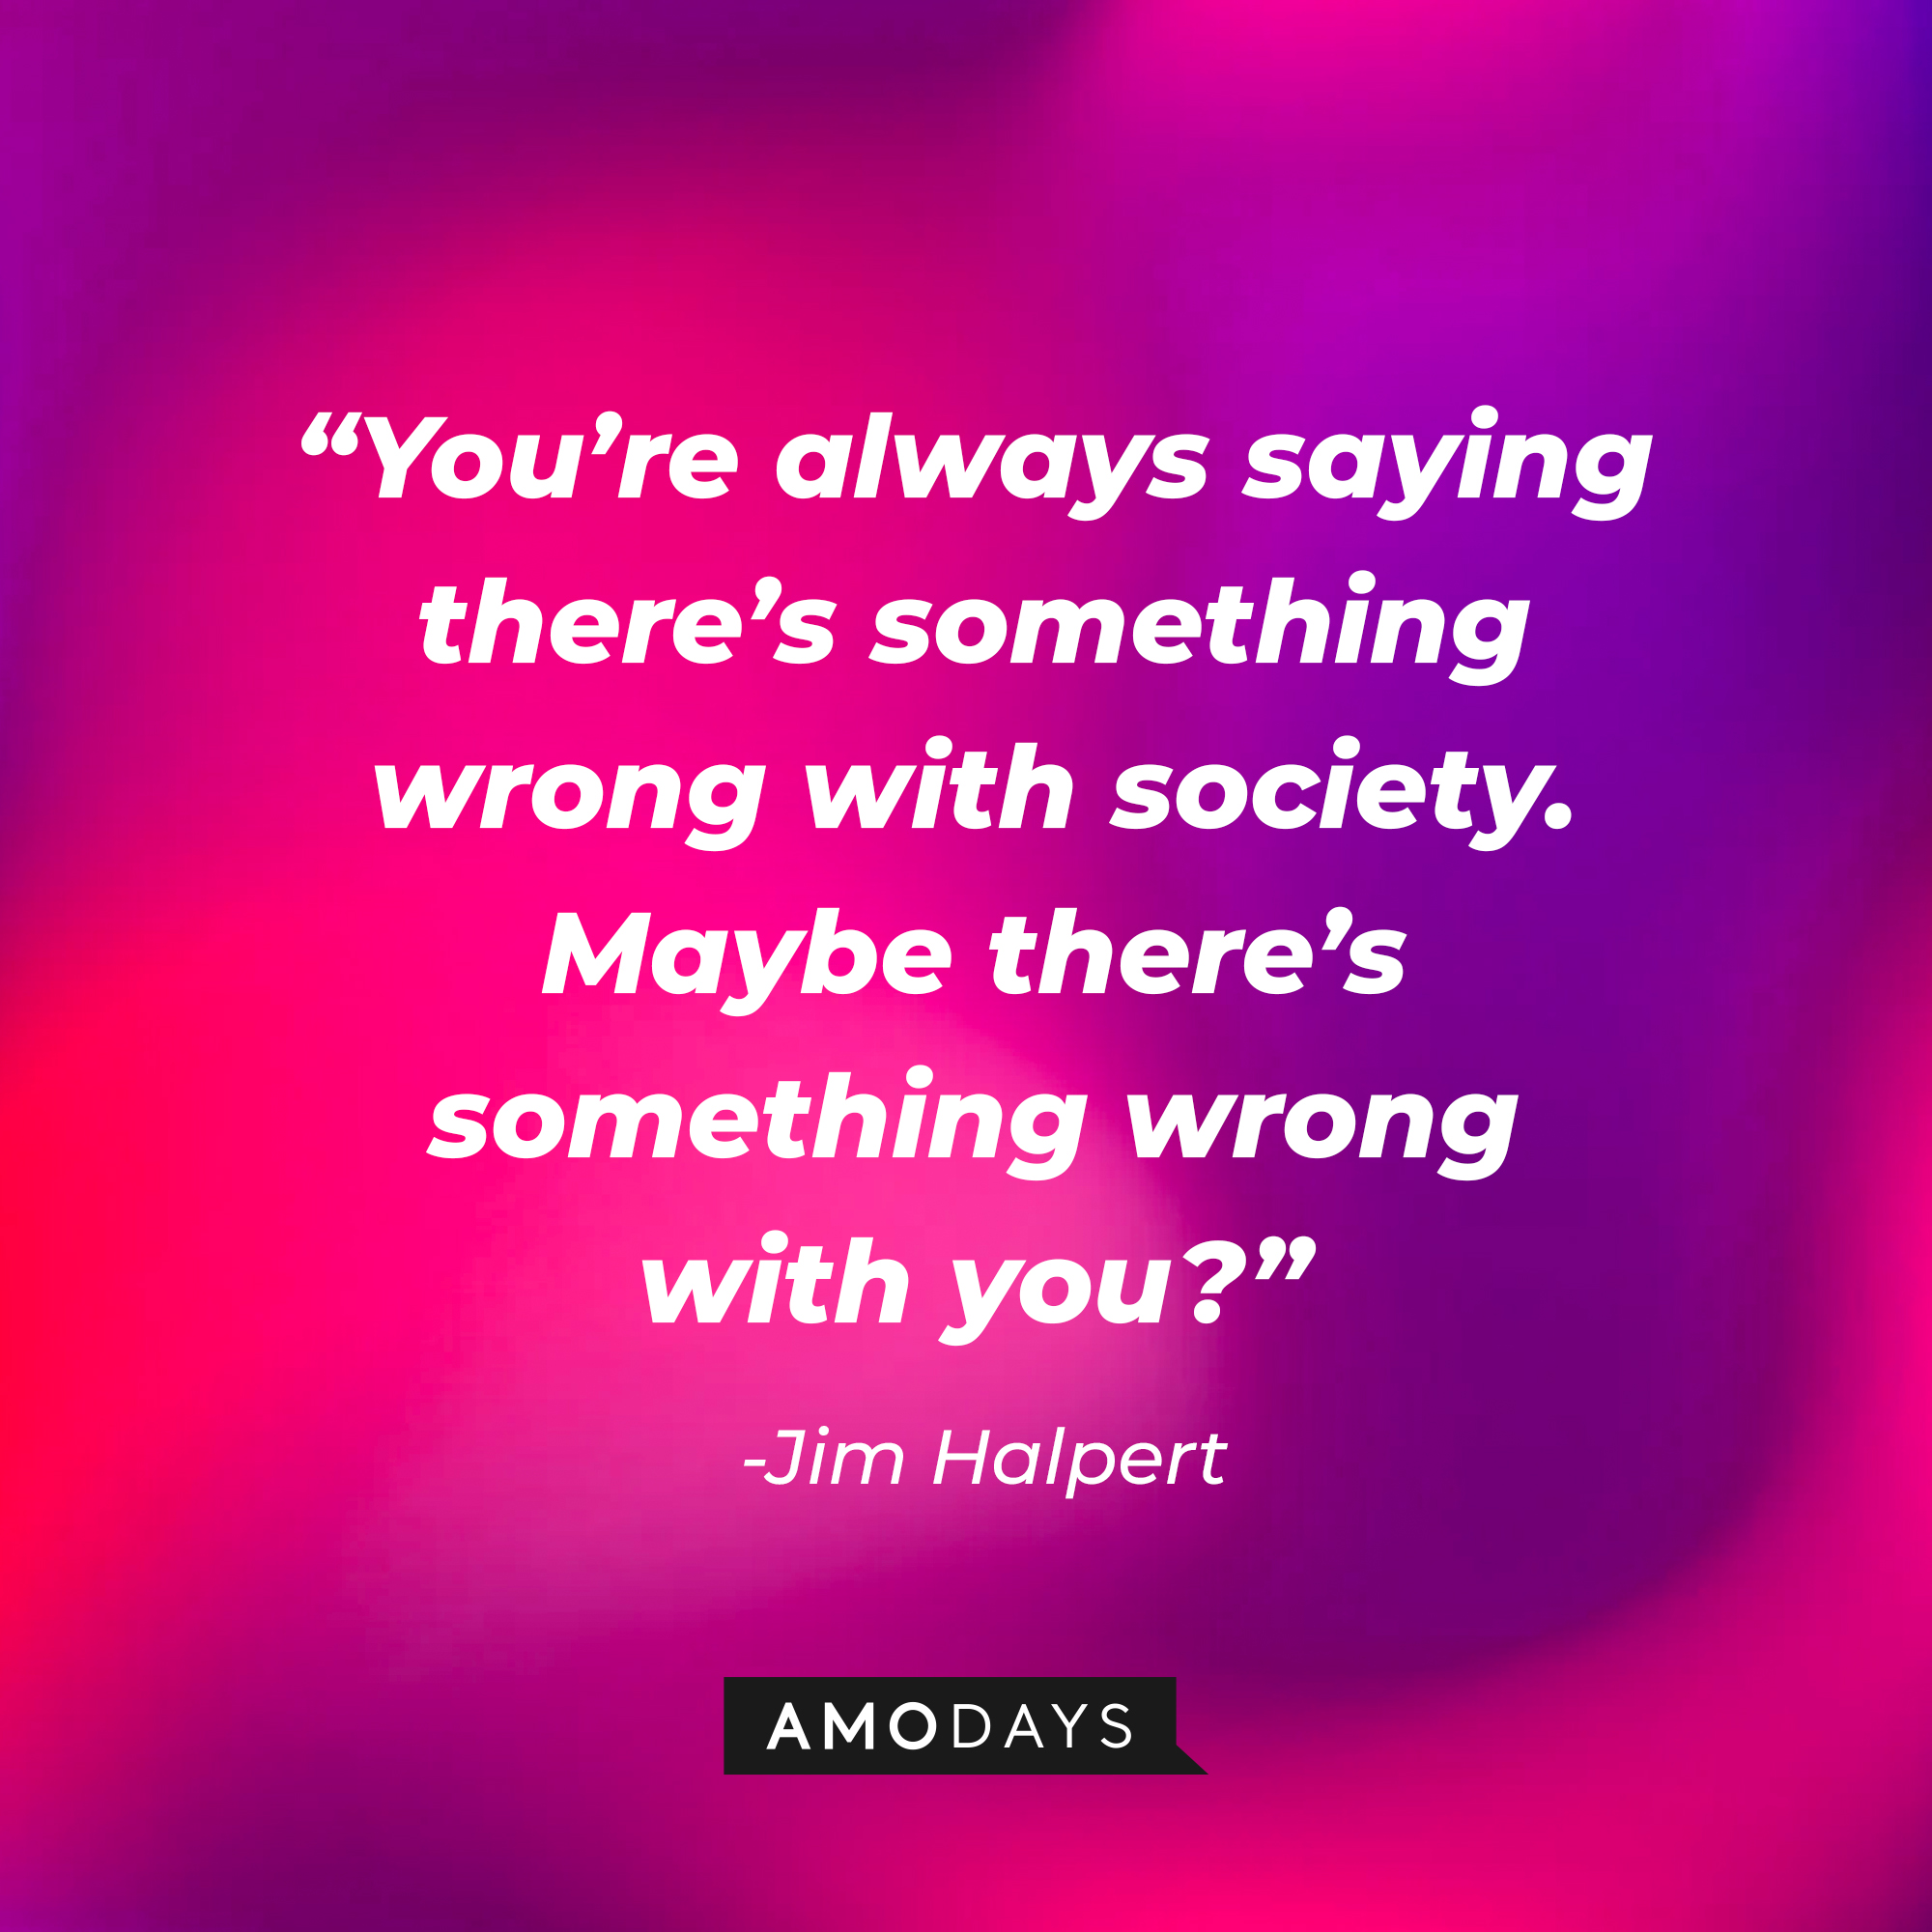 Jim Halpert’s quote: “You’re always saying there’s something wrong with society. Maybe there’s something wrong with you?” | Source: AmoDays